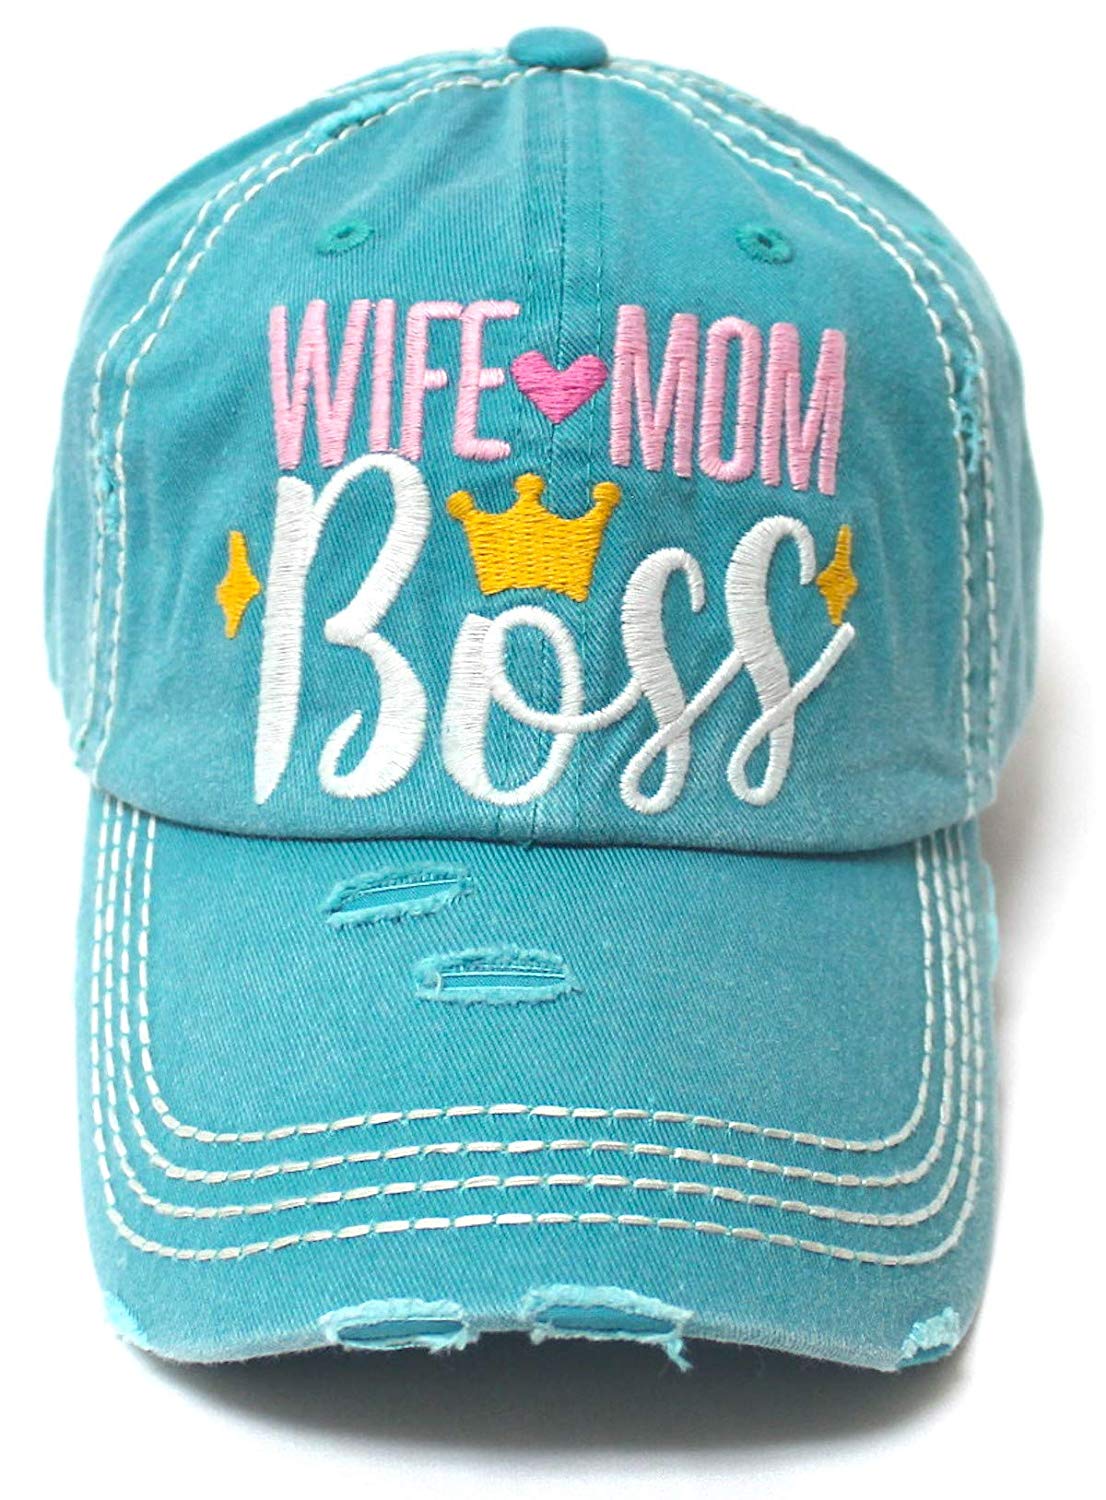 Women's Ballcap Wife Mom Boss Queen Crown Embroidery Hat, Turquoise - Caps 'N Vintage 